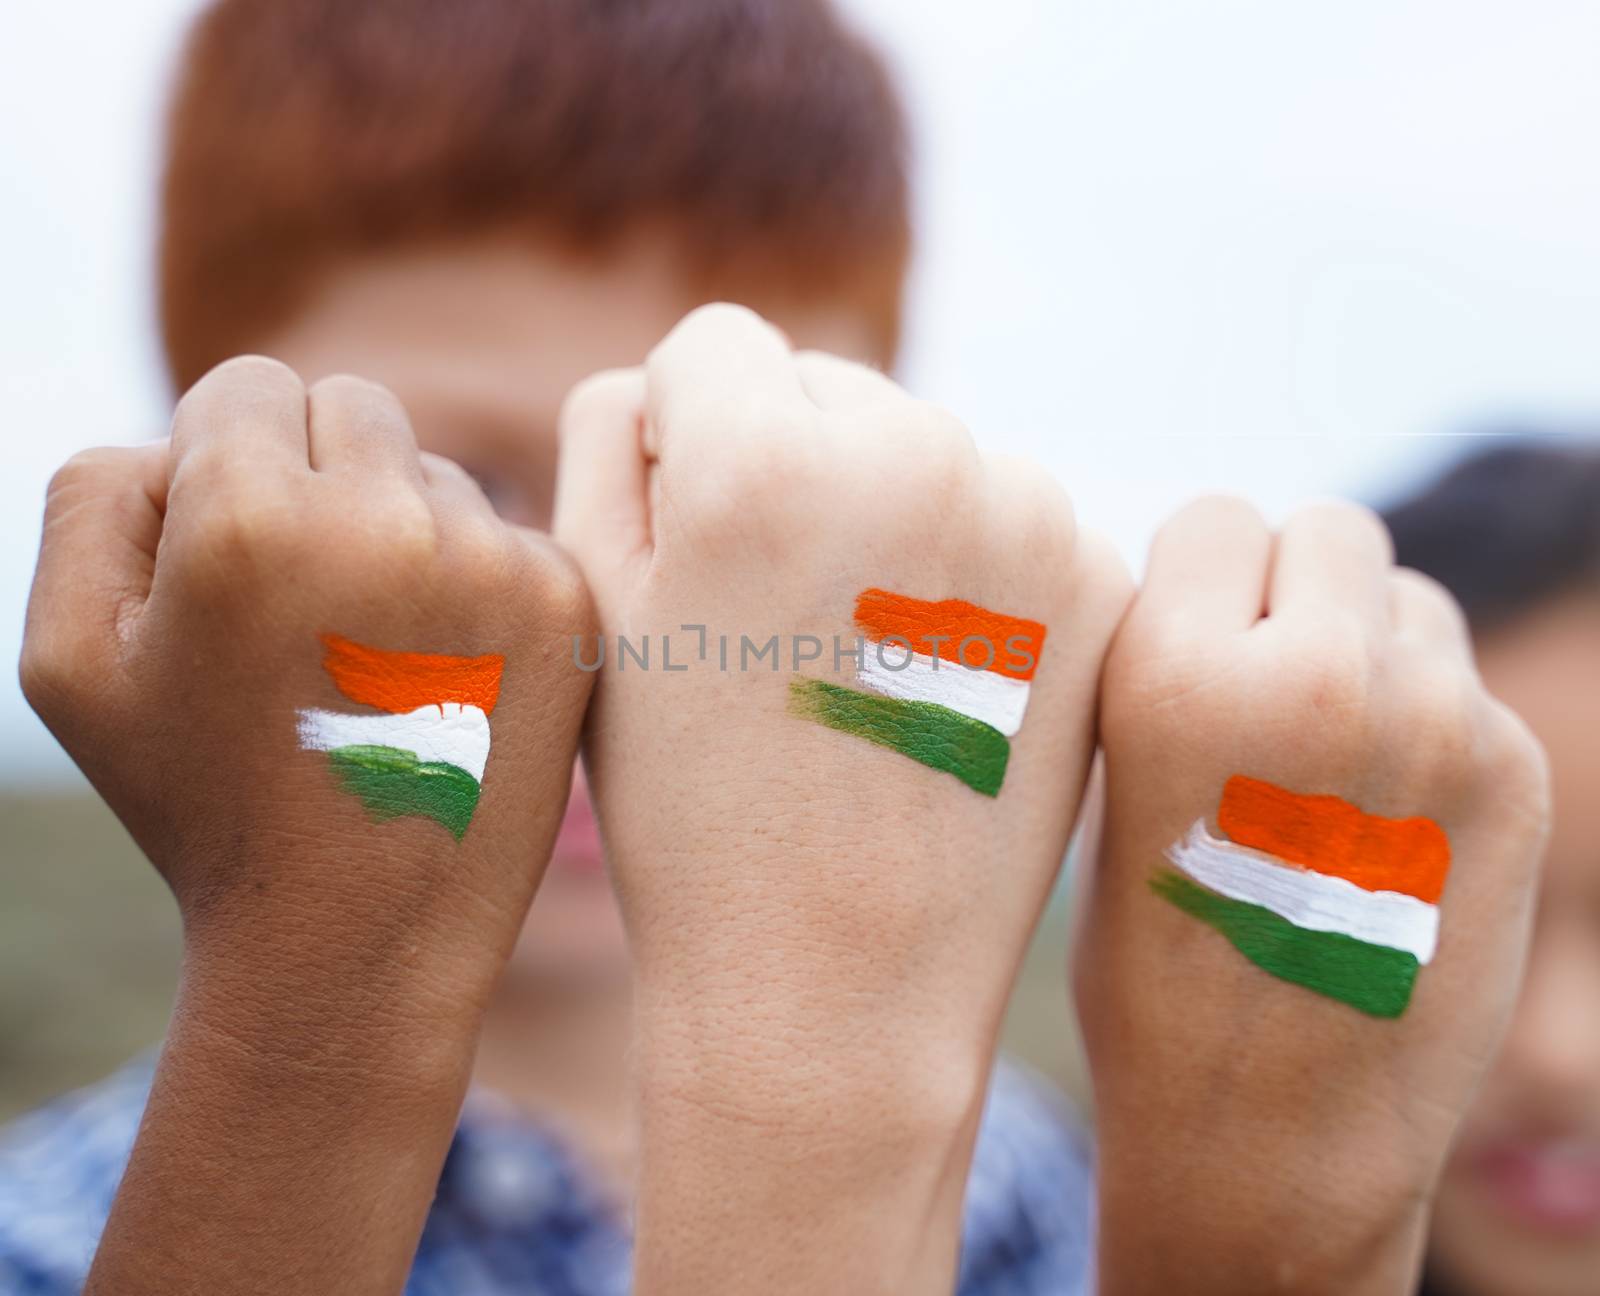 Kids fist hands painted with Indian falg during independence day or republic day celebration - concept showing of solidarity, raised fist of a protesters or patriotism by lakshmiprasad.maski@gmai.com